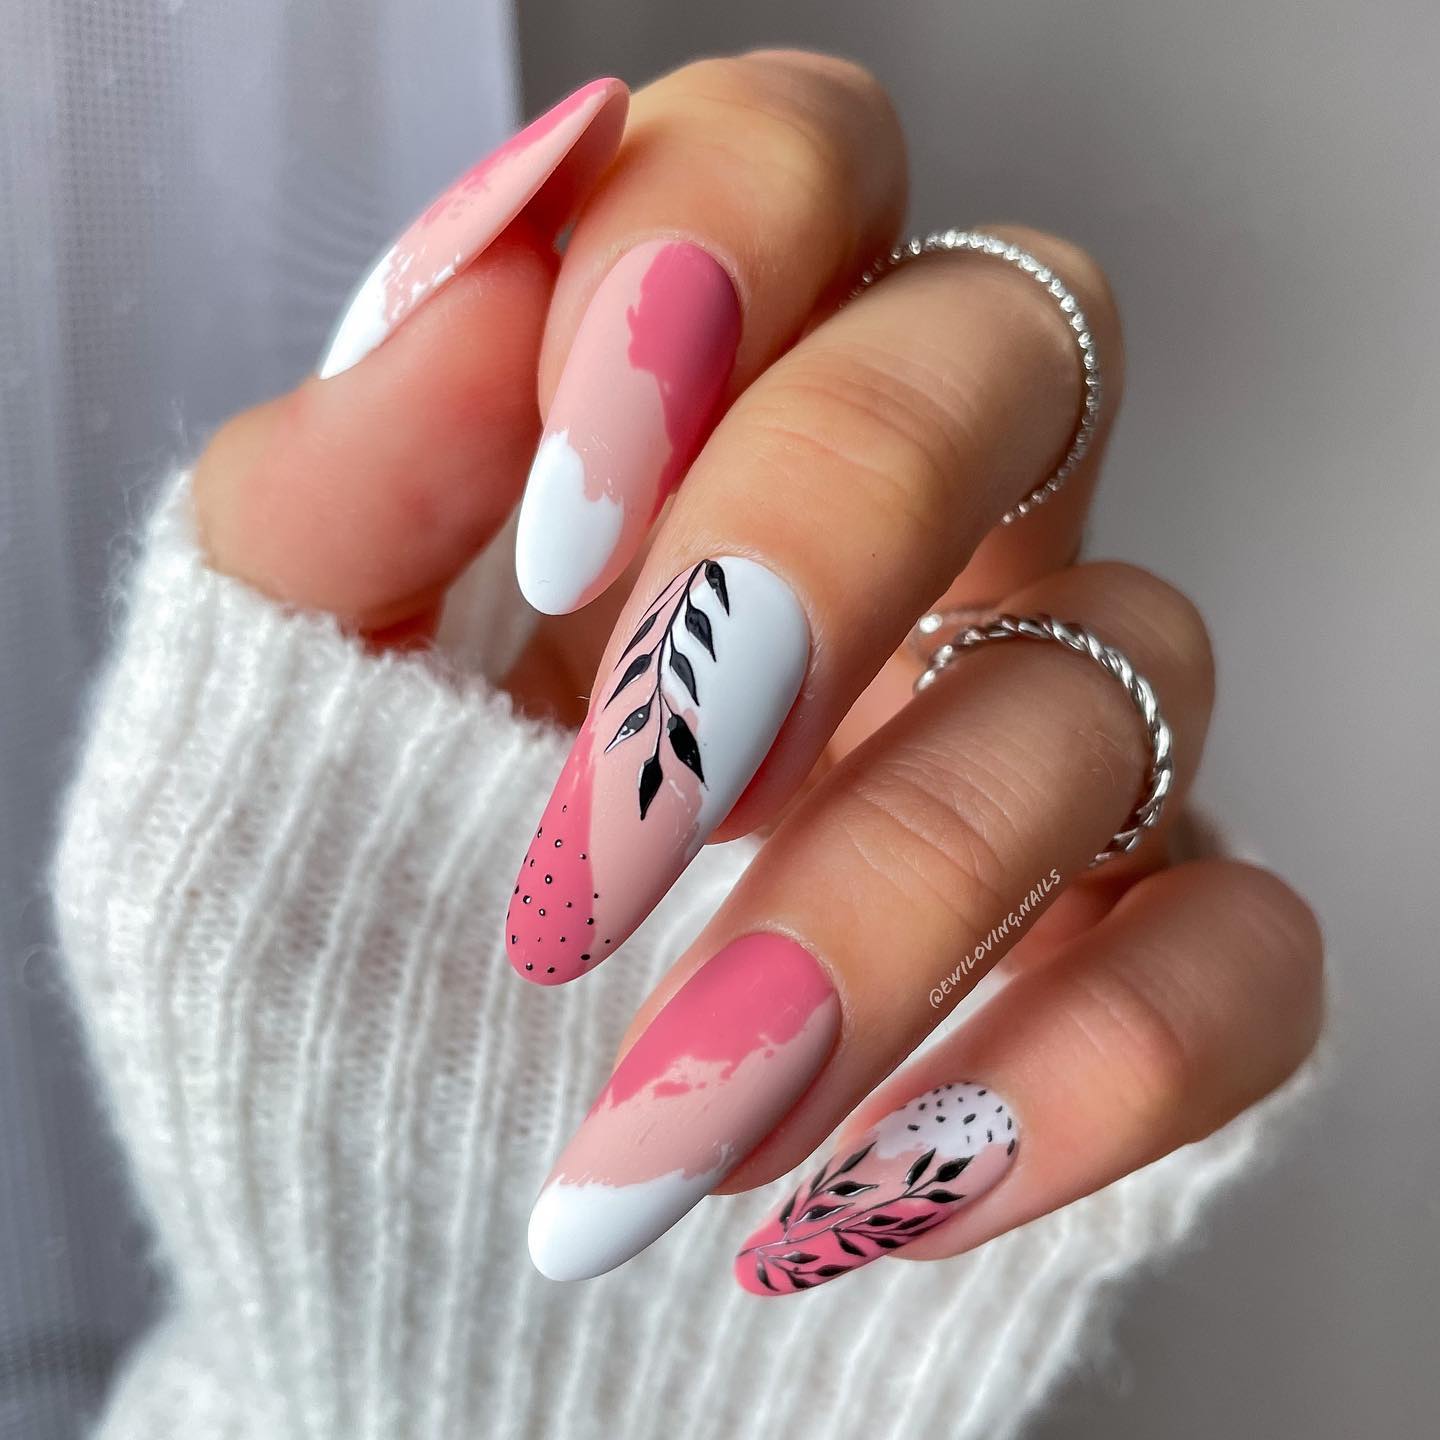 50 Best Nail Designs Trends To Try Out In 2022 images 41